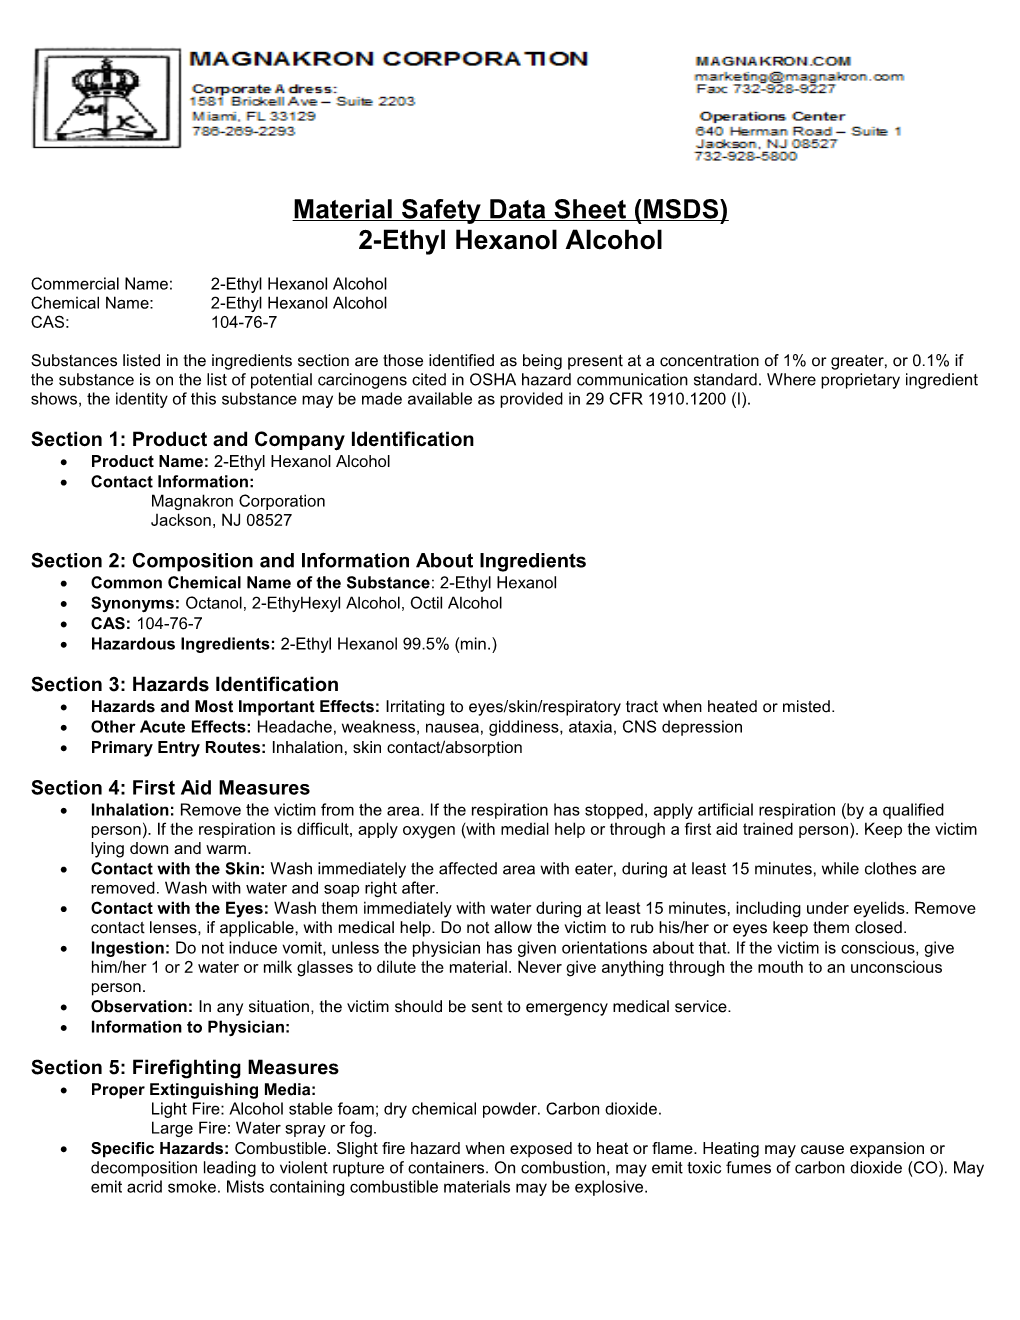 Material Safety Data Sheet s15